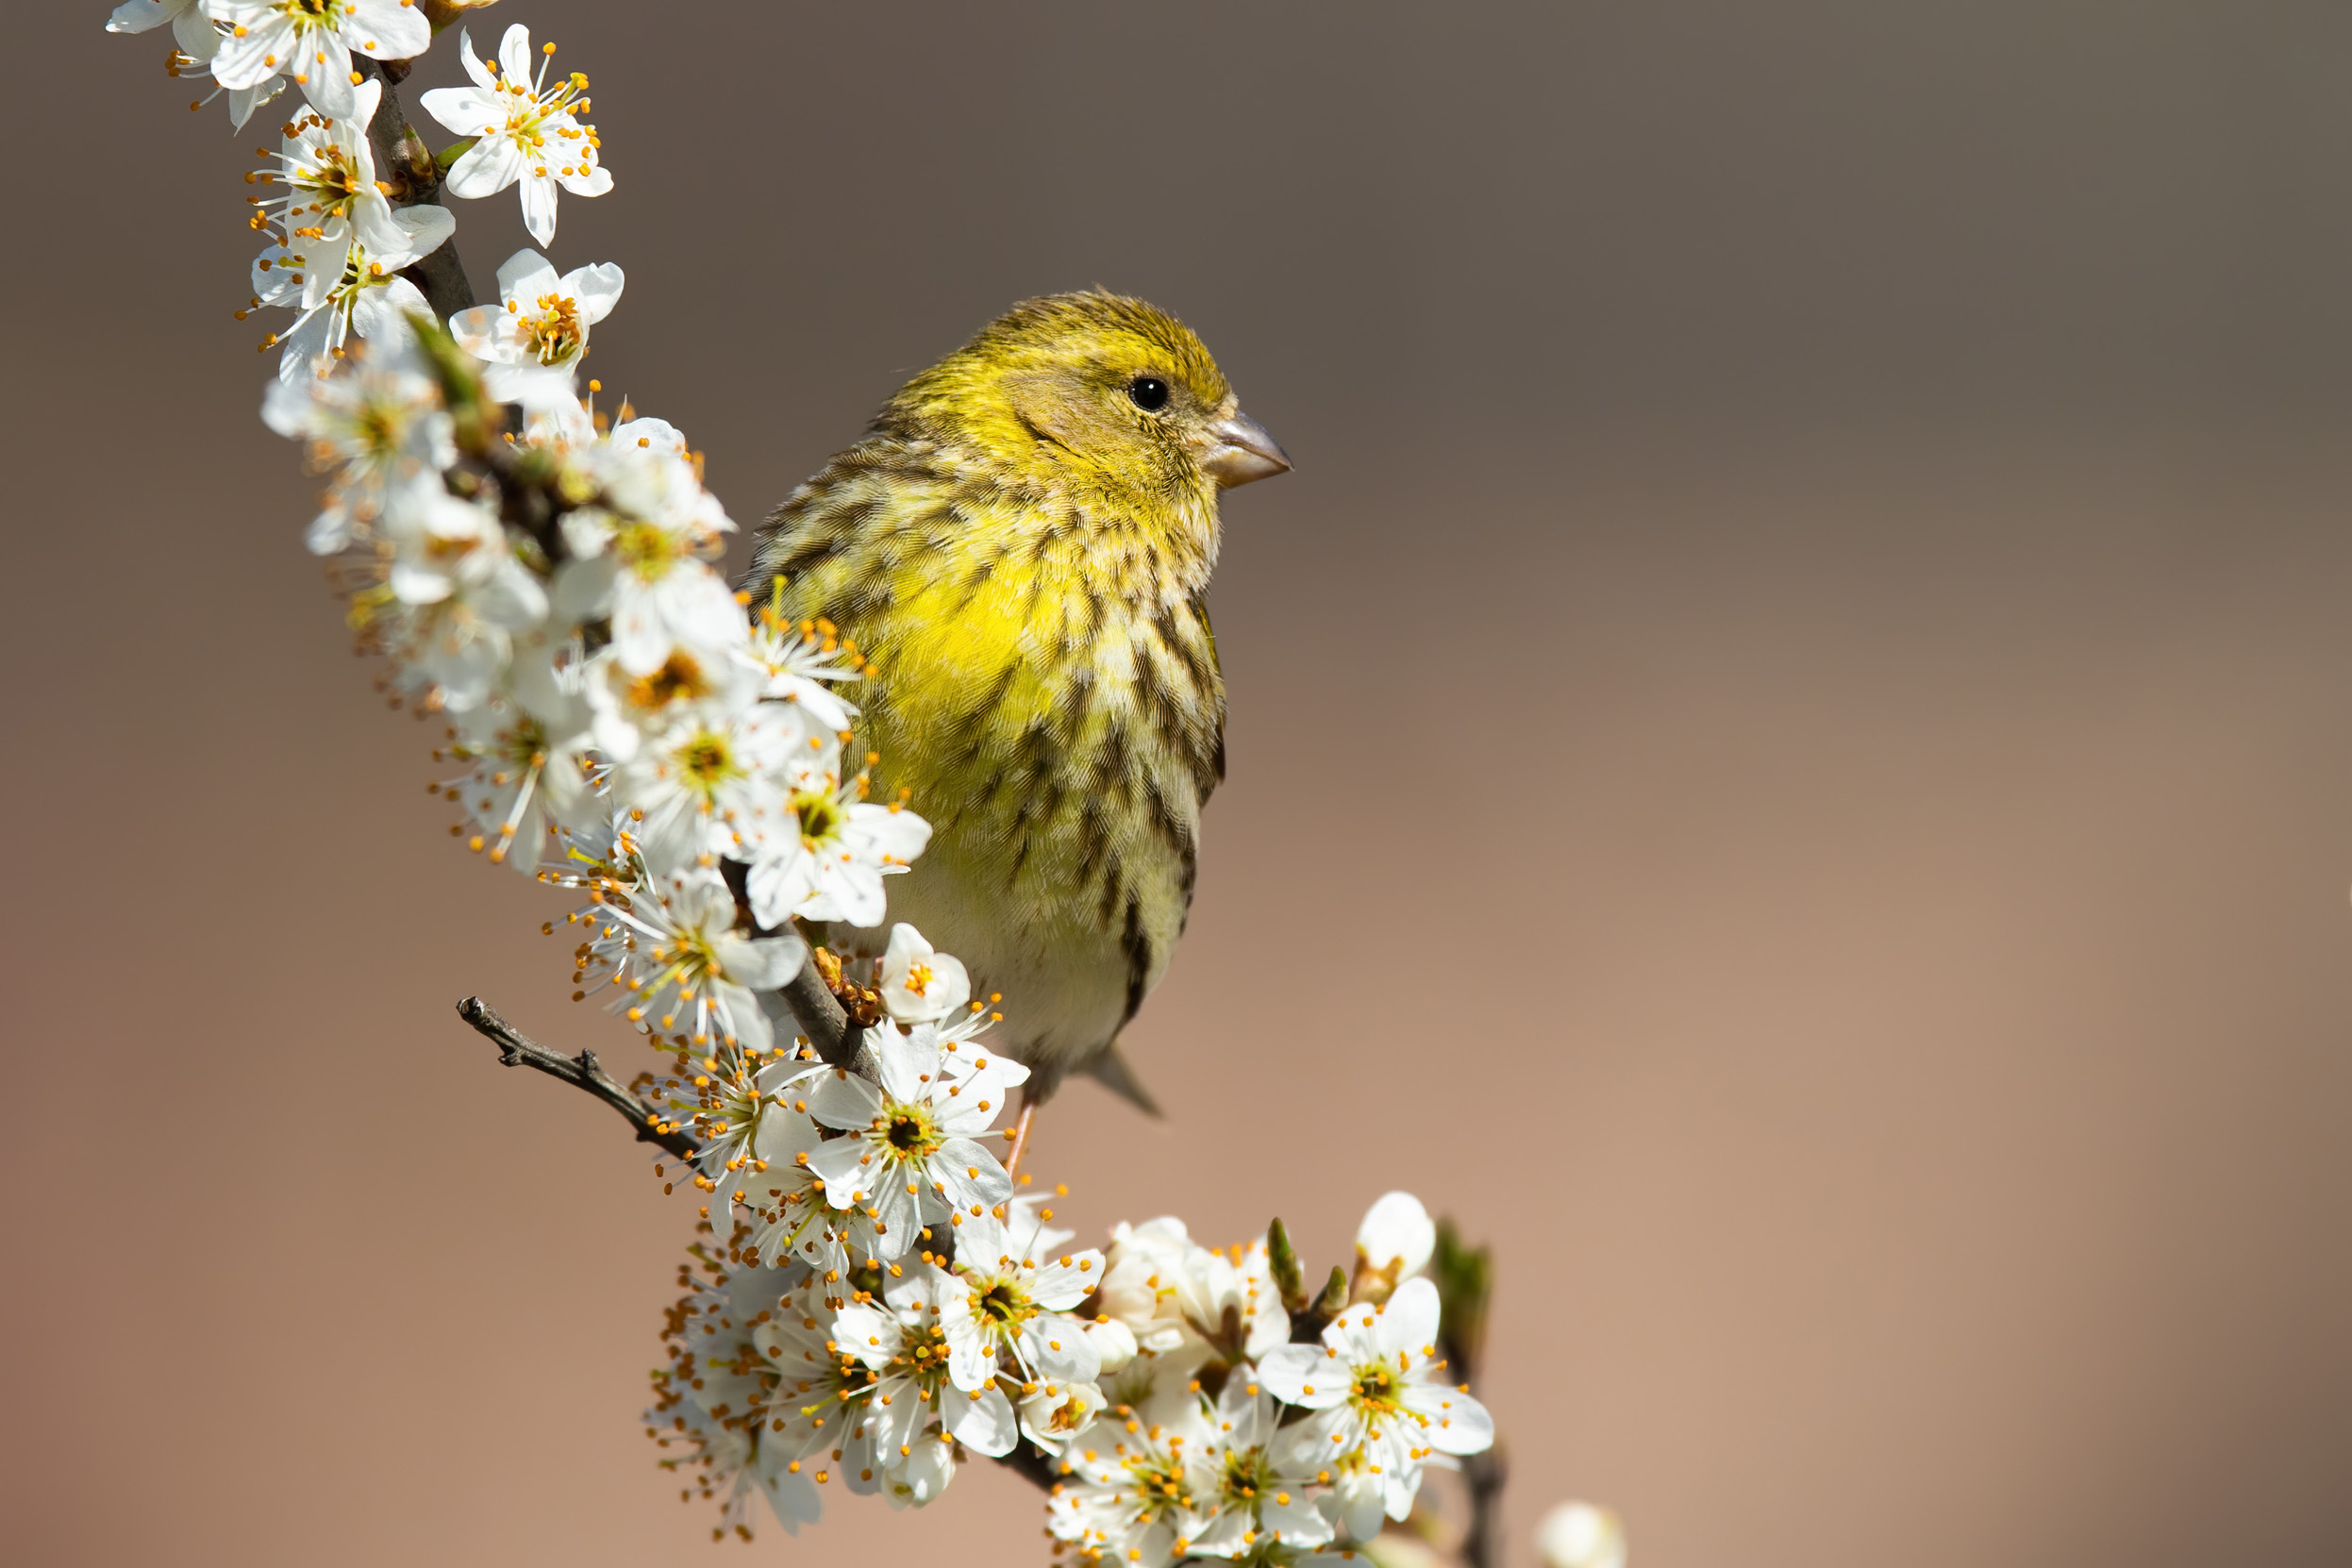 A lone Serin perched on a branch covered in white flower blossom.